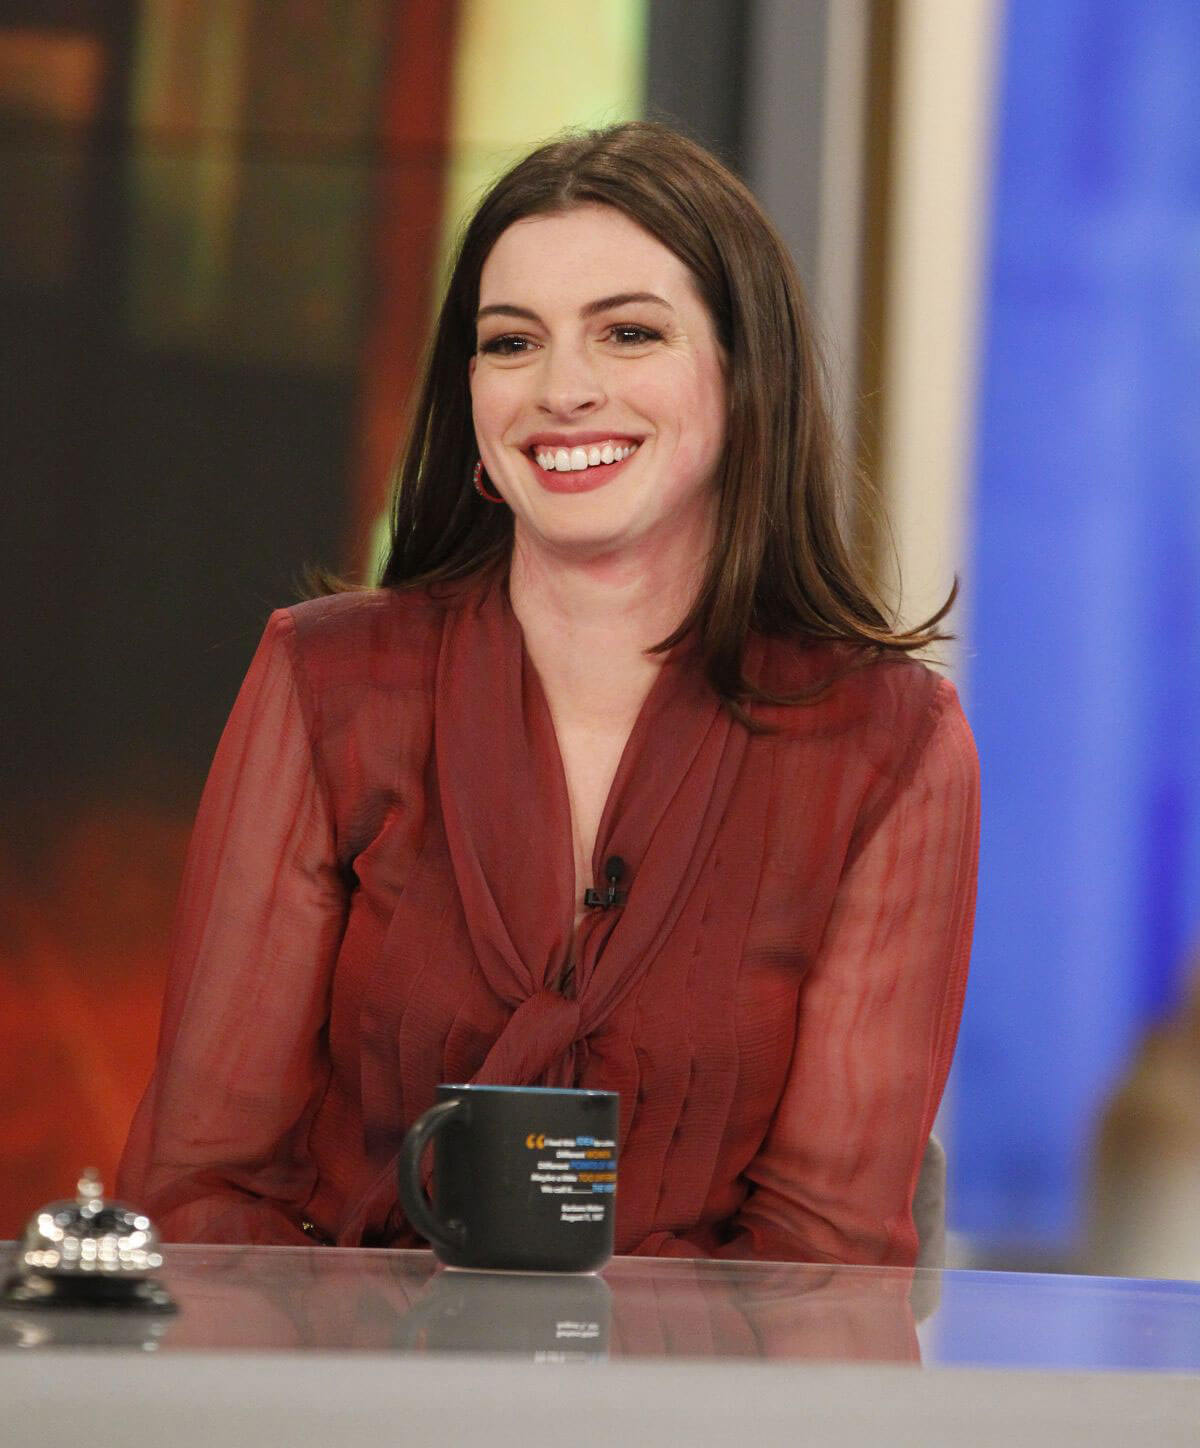 Anne Hathaway at The View Images